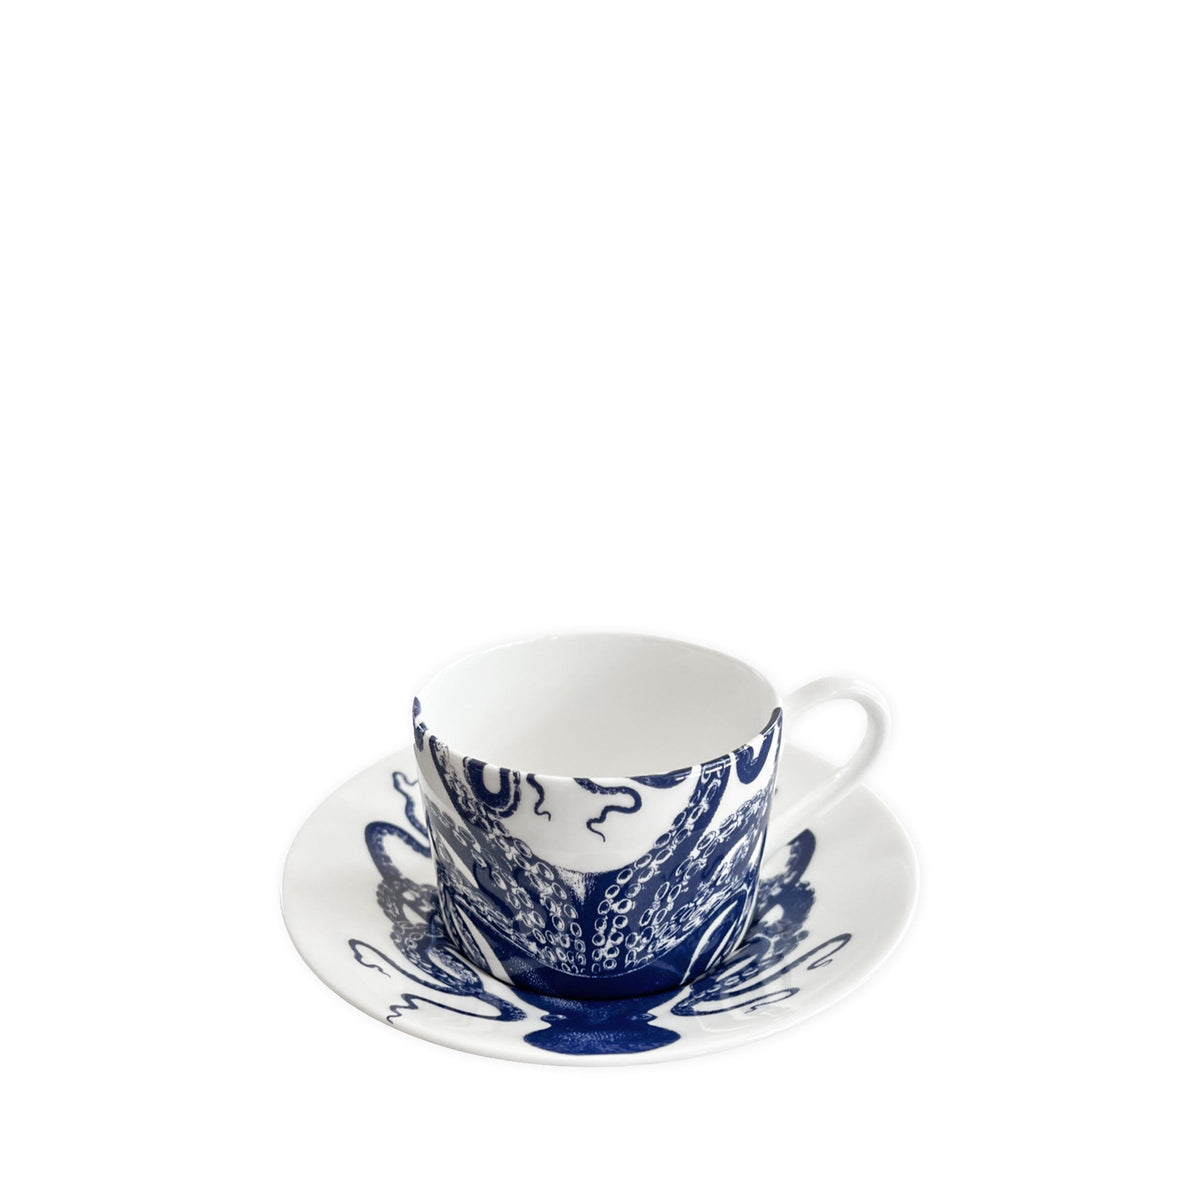 A white ceramic teacup and saucer featuring a striking blue octopus design, perfect for ocean lovers. Dishwasher safe for easy cleaning. Introducing the Lucy Cups &amp; Saucers, Set of 2 by Caskata.